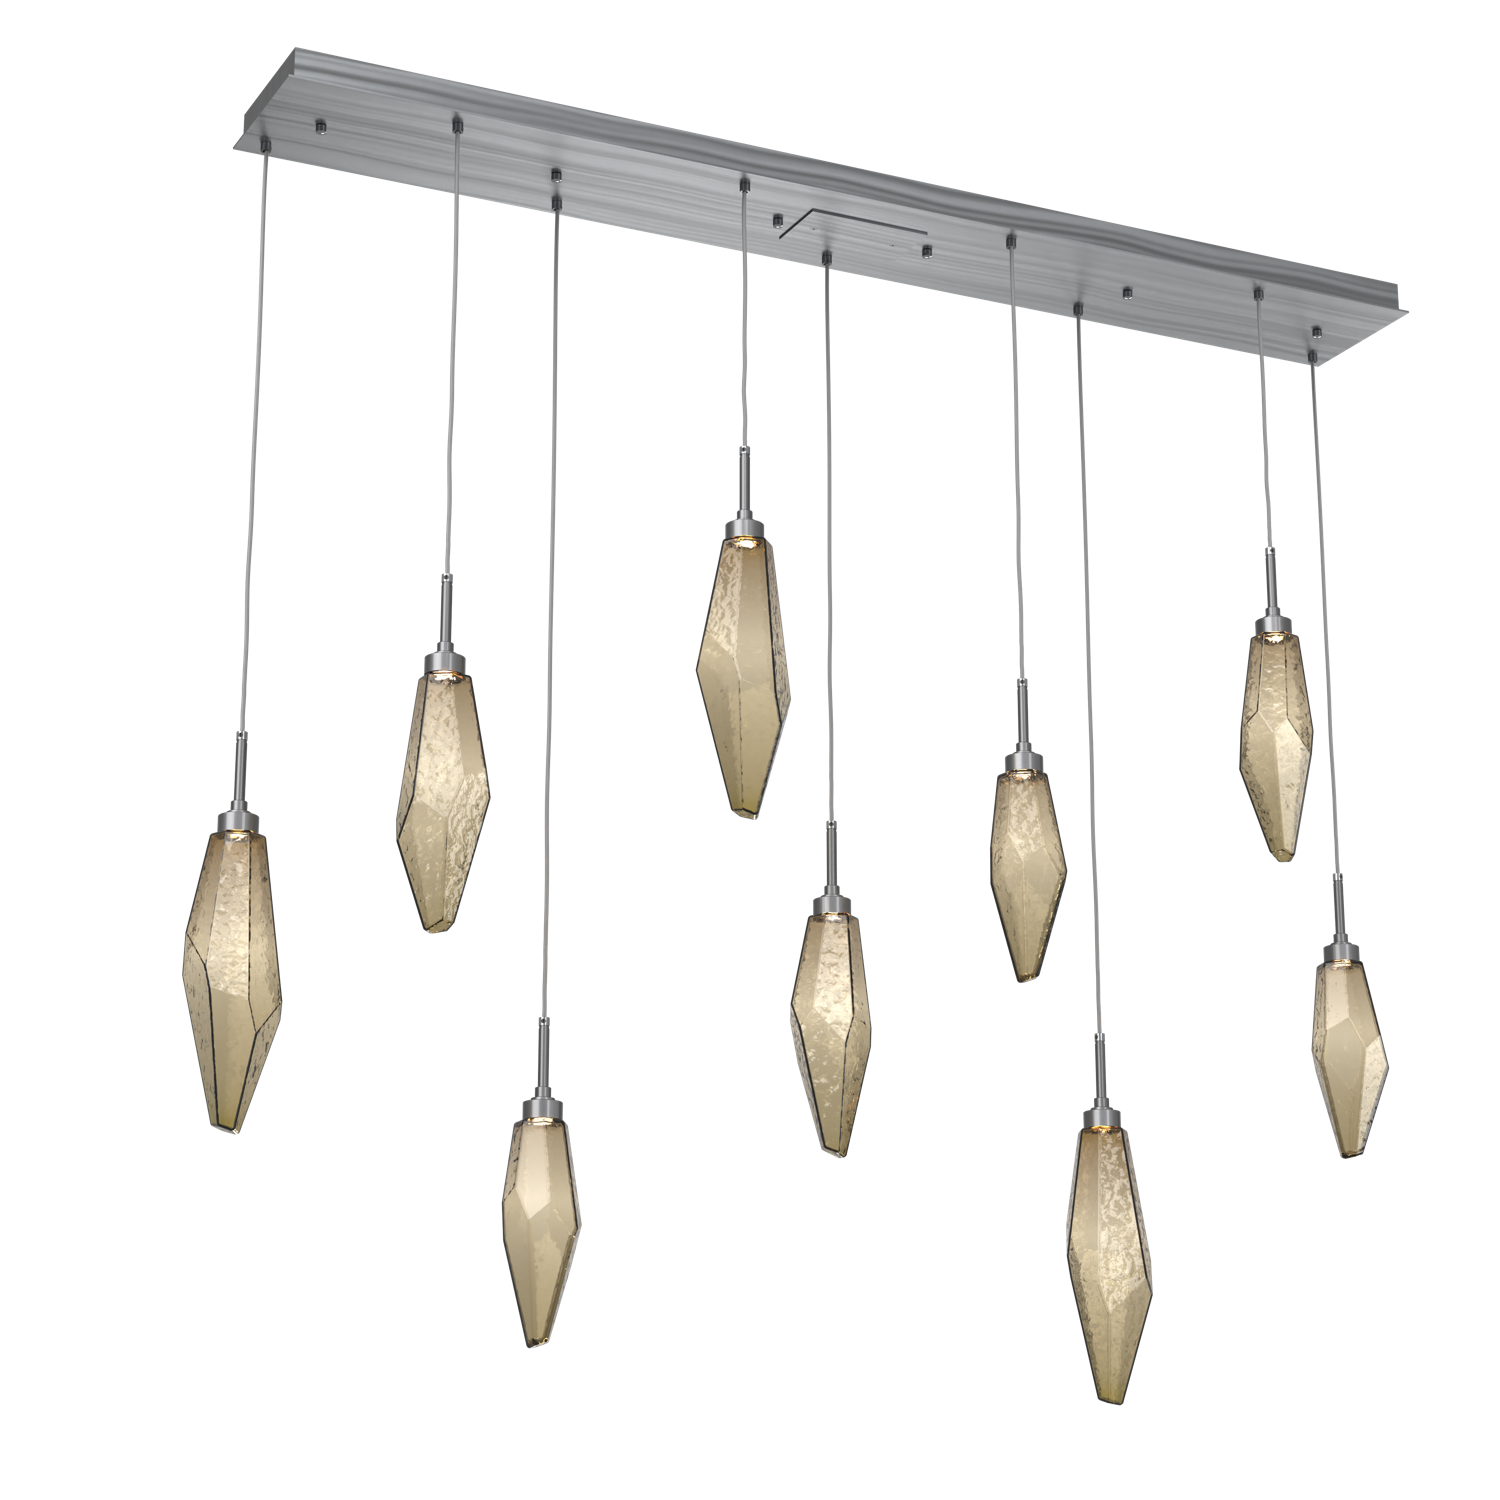 PLB0050-09-GM-CB-Hammerton-Studio-Rock-Crystal-9-light-linear-pendant-chandelier-with-gunmetal-finish-and-chilled-bronze-blown-glass-shades-and-LED-lamping